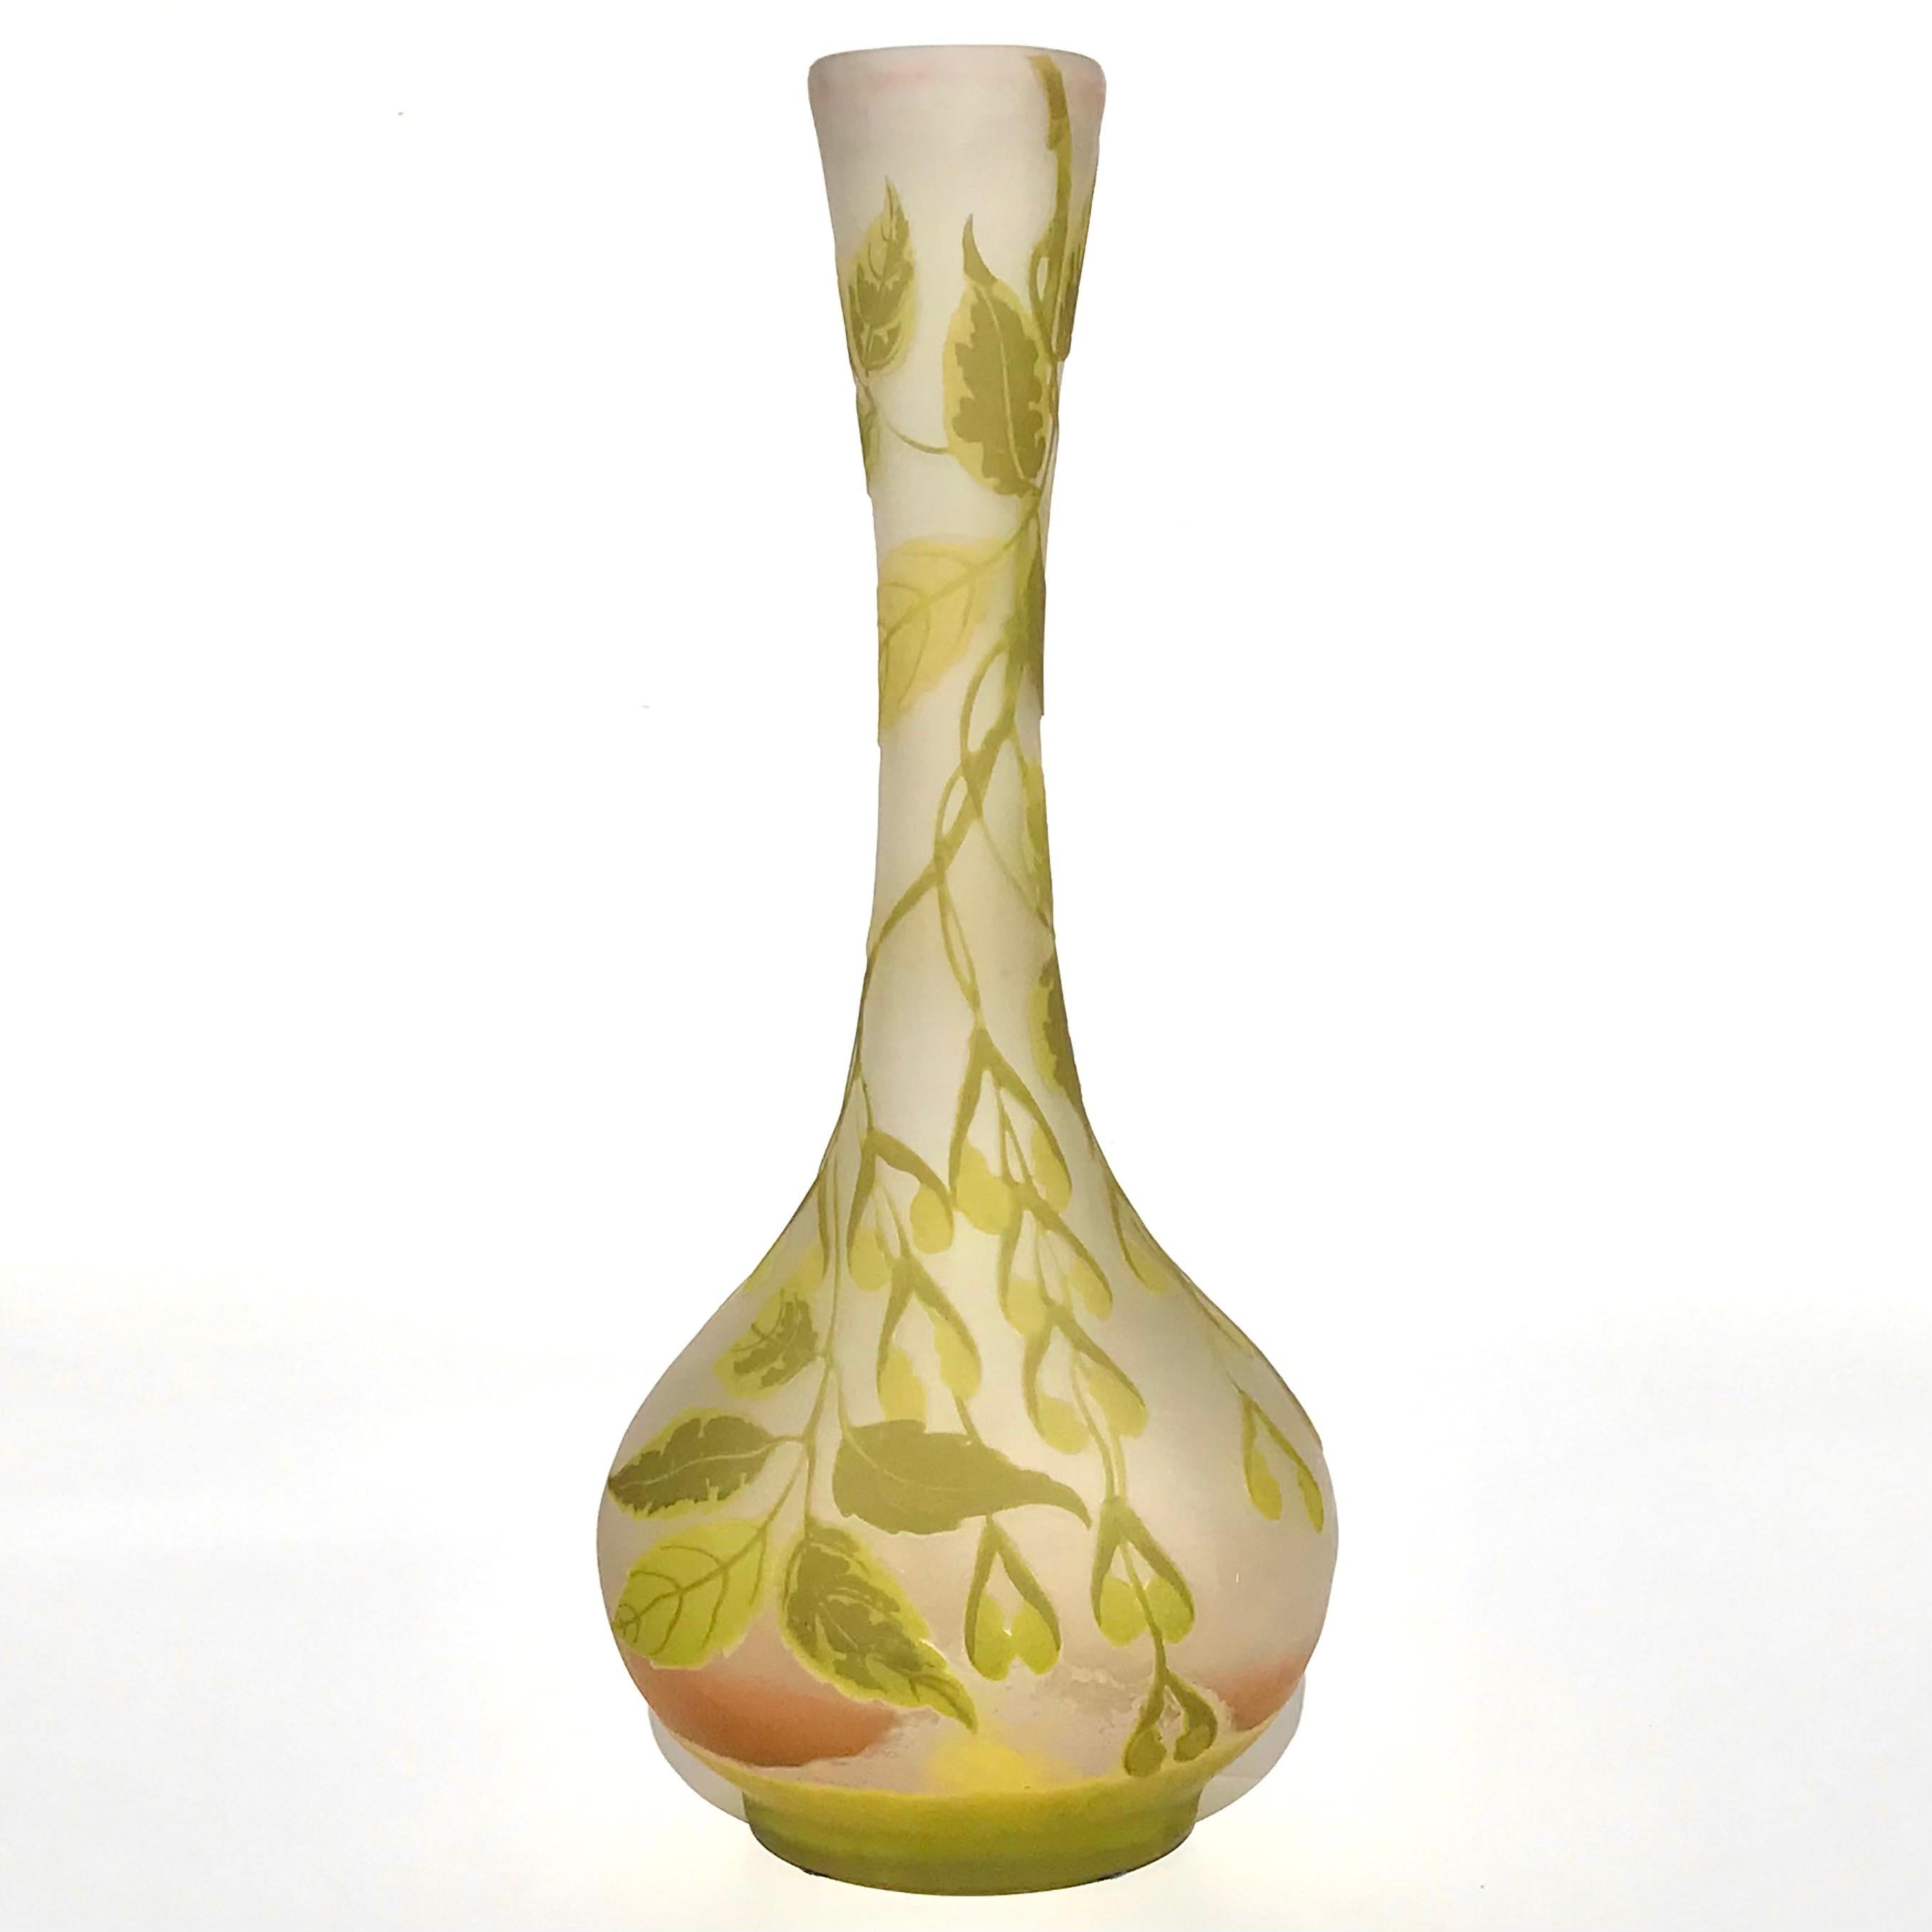 Emile Gallé Cameo Glass Leaves and Pods Vase, circa 1900
Marks: Gallé
Height: 15.25 inches (38.7 cm)
Width: 6.5 Inches Depth: 5 Inches

Condition: Tall vase of colorless glass overlaid in peach, chartreuse and green acid-etched with cascading